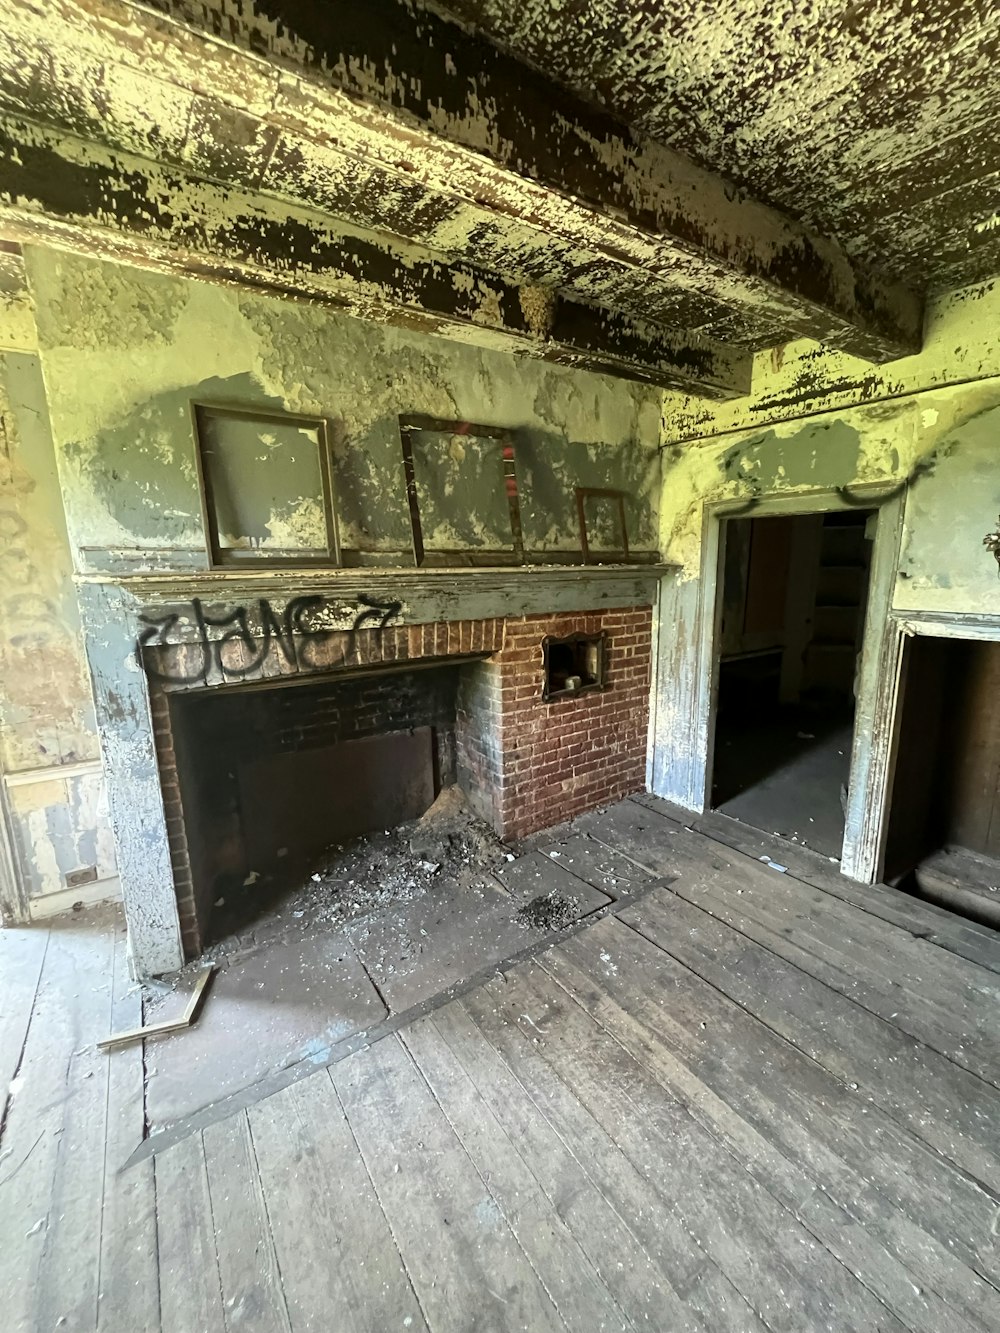 an empty room with a fireplace and graffiti on the walls